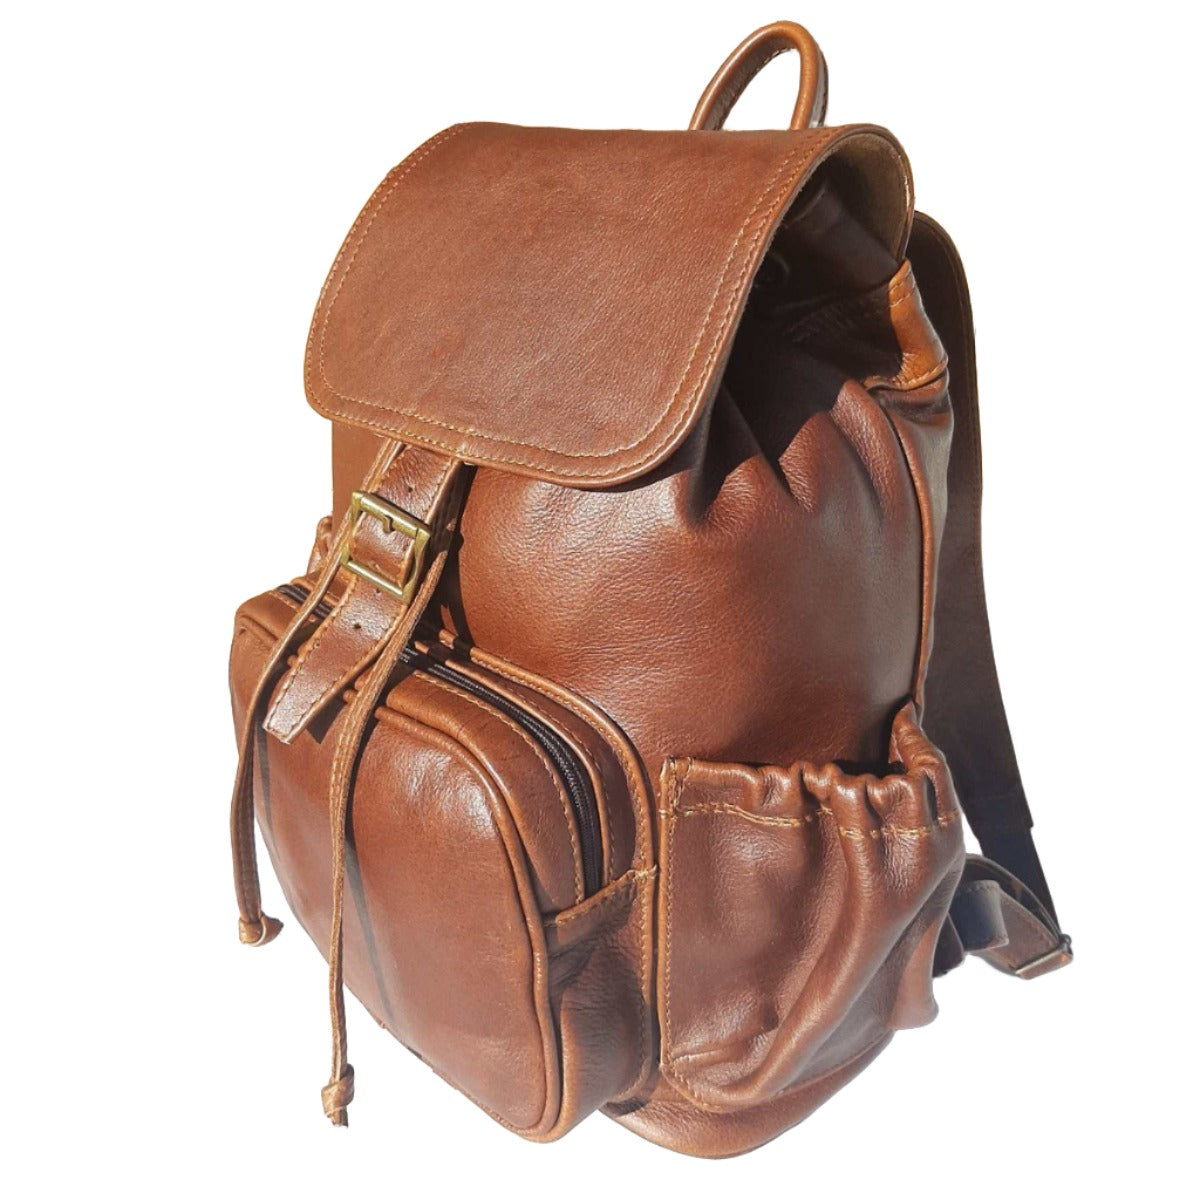 Leather Backpacks with flap XL in Pecan tan colour- cape Masai leather